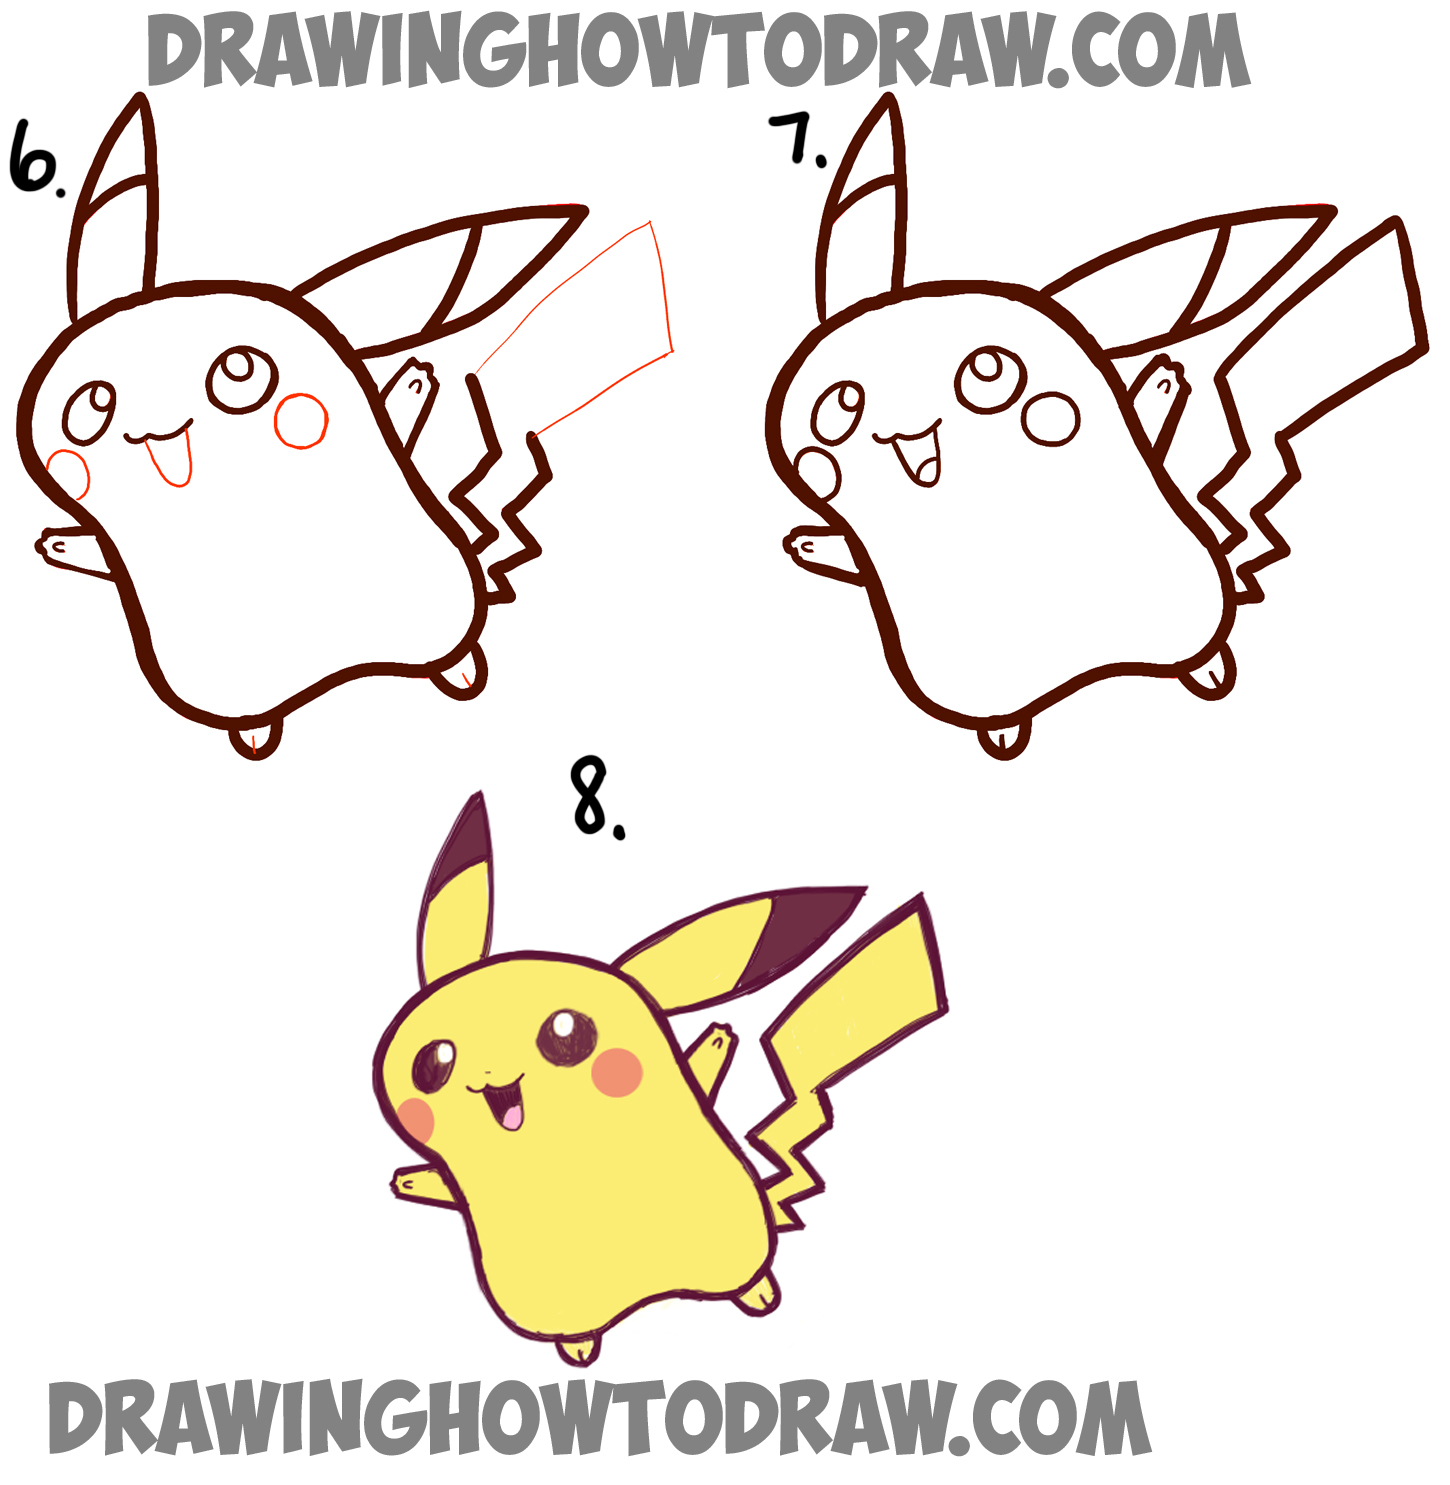 Pikachu Drawing Tutorial - How to draw a Pikachu step by step